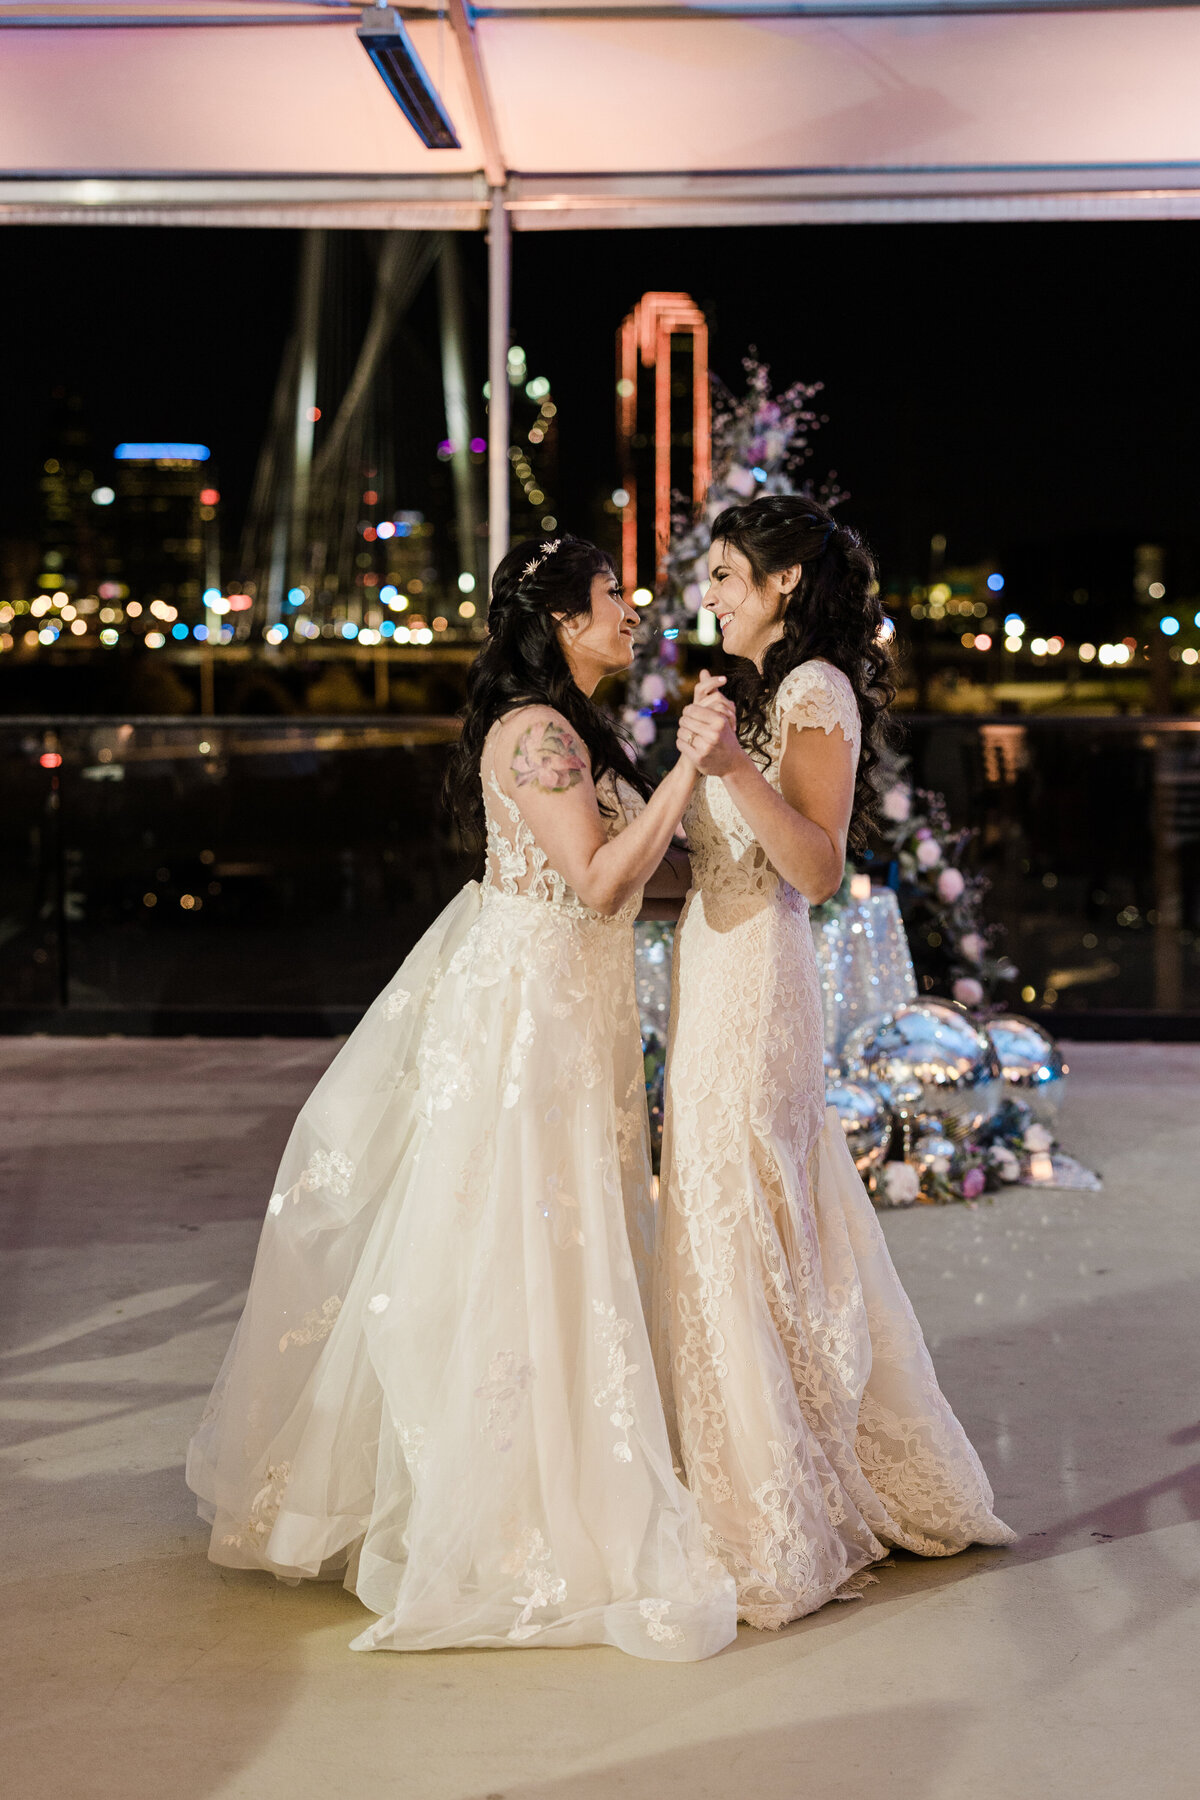 A candid shot of two brides sharing their first dance during their wedding reception in downtown Dallas, Texas. Both brides are smiling and looking joyfully into each other's eyes. Both brides are wearing intricate, white dresses, and the Dallas skyline can be seen lit up in the background.